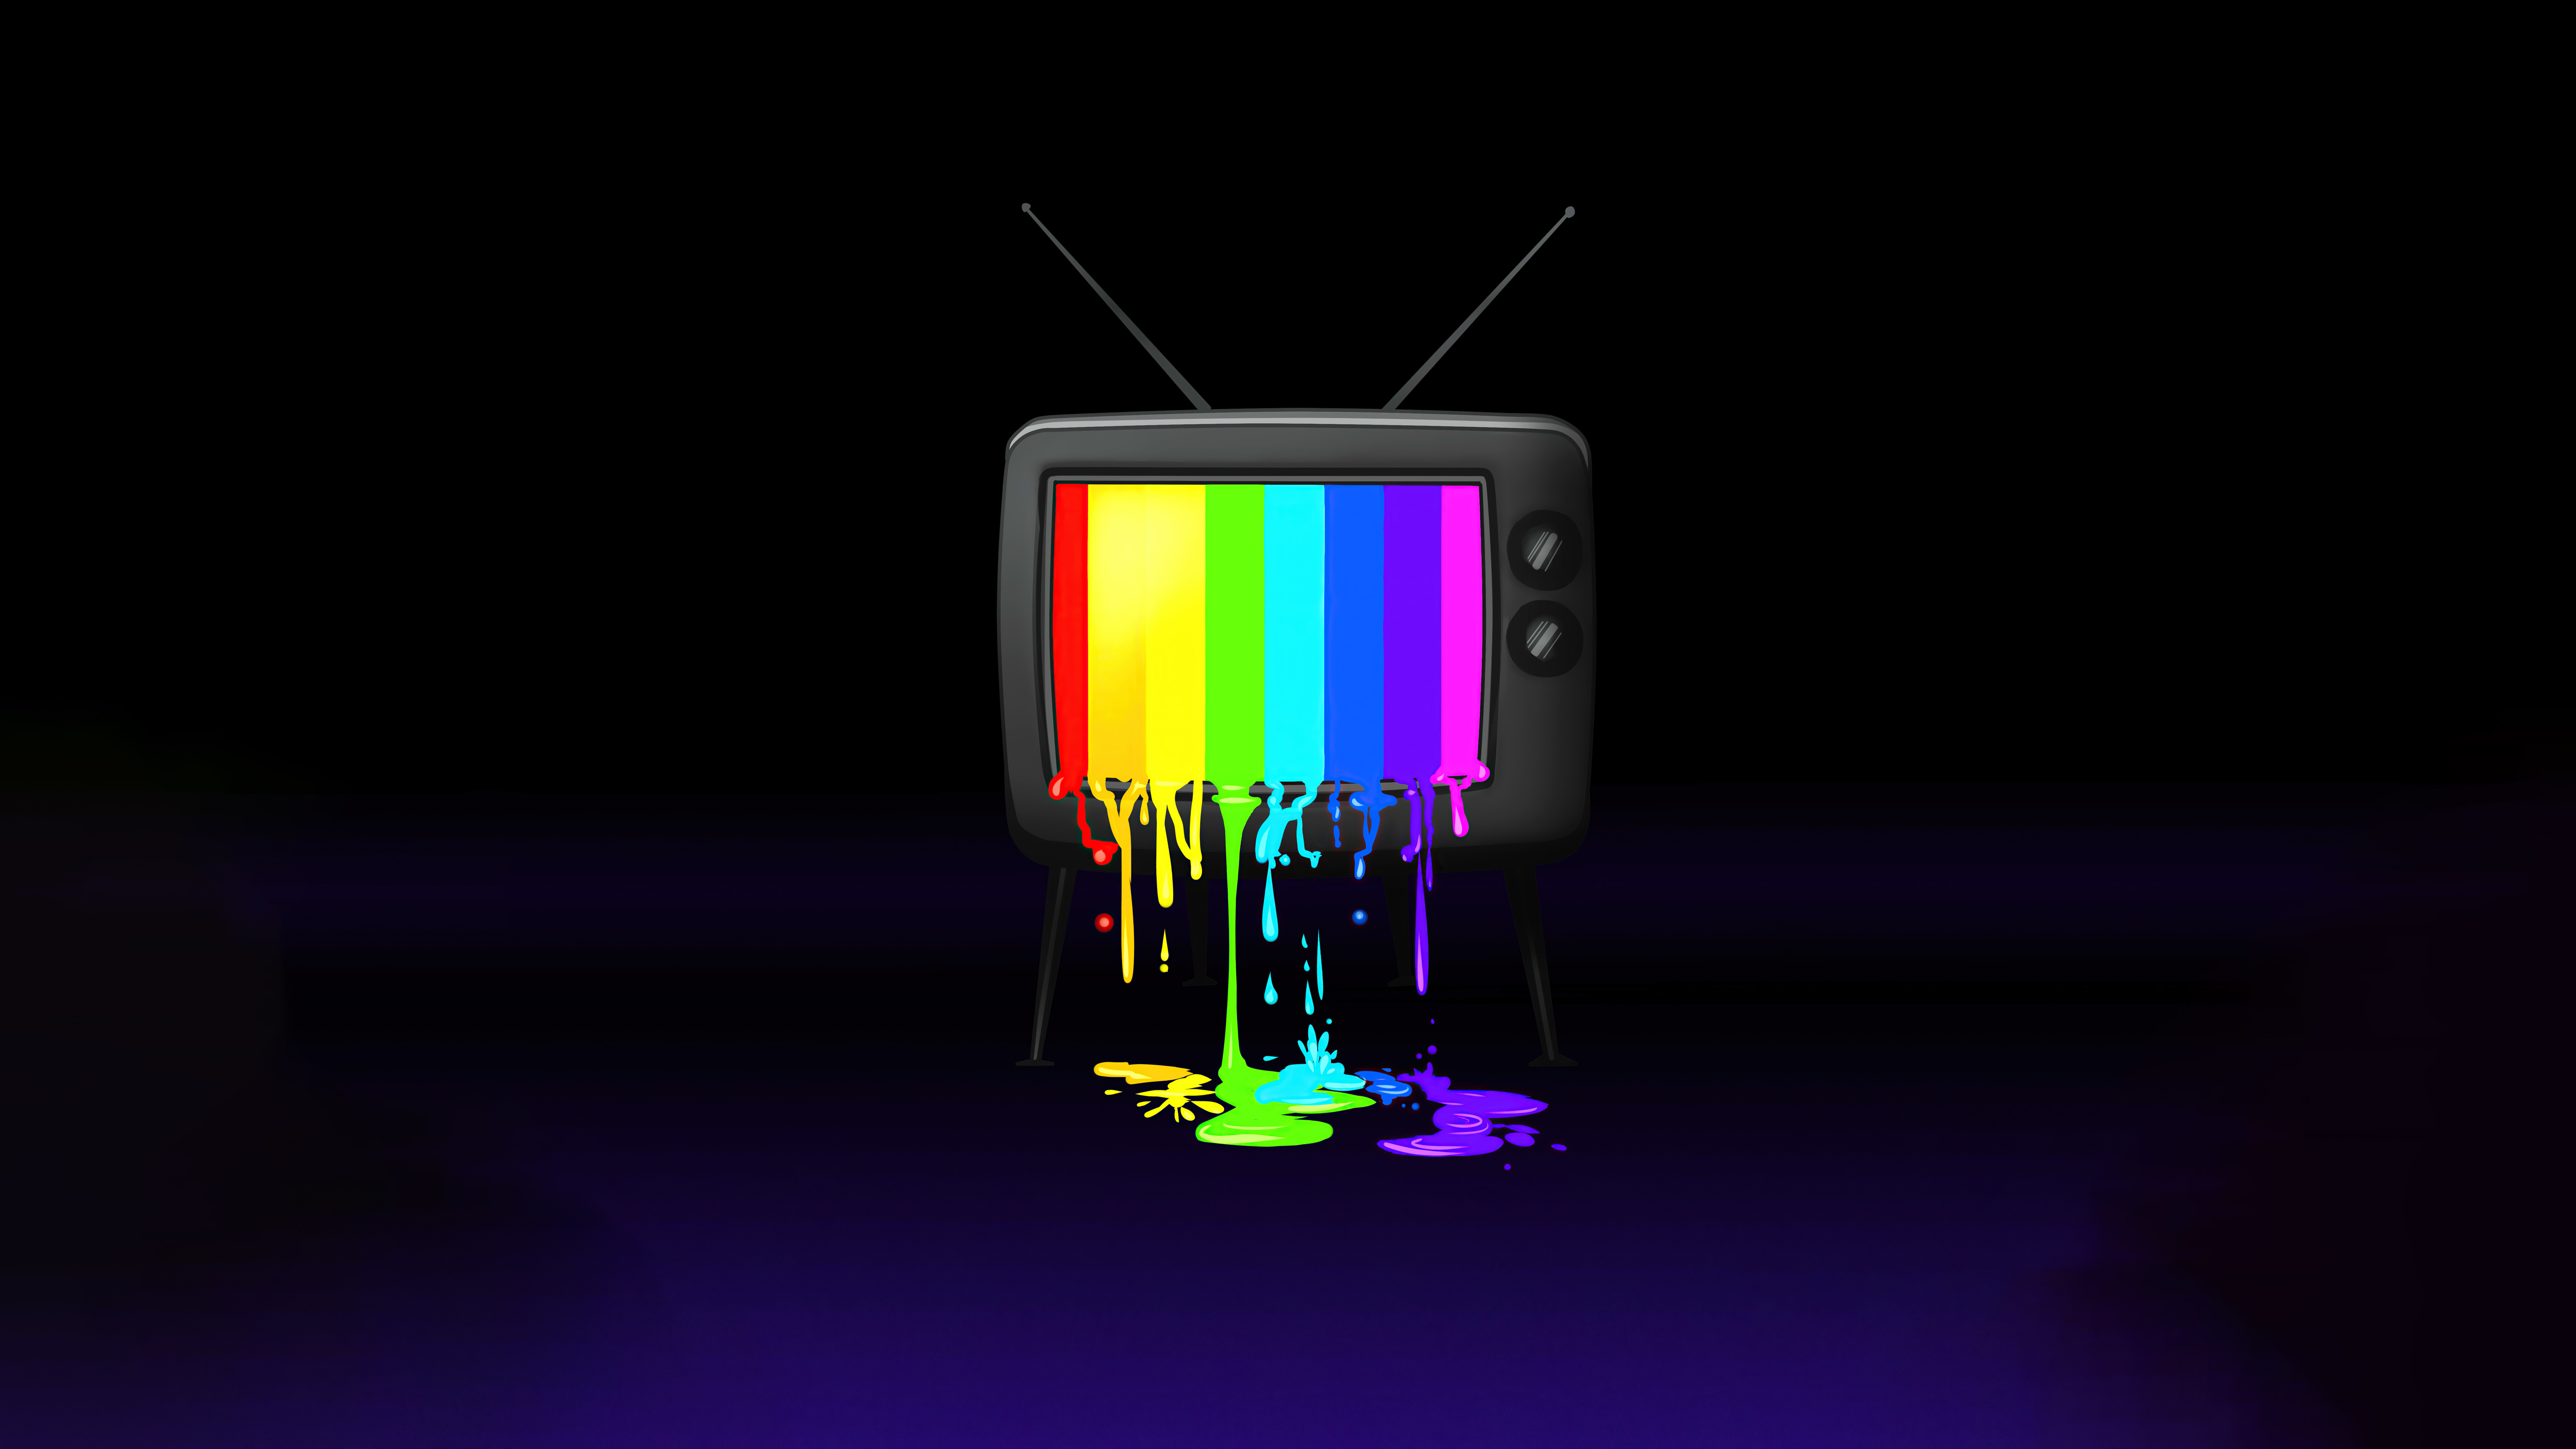 1280x1024 Rgb Tv Minimal 5k 1280x1024 Resolution Hd 4k Wallpapers Images Backgrounds Photos And Pictures